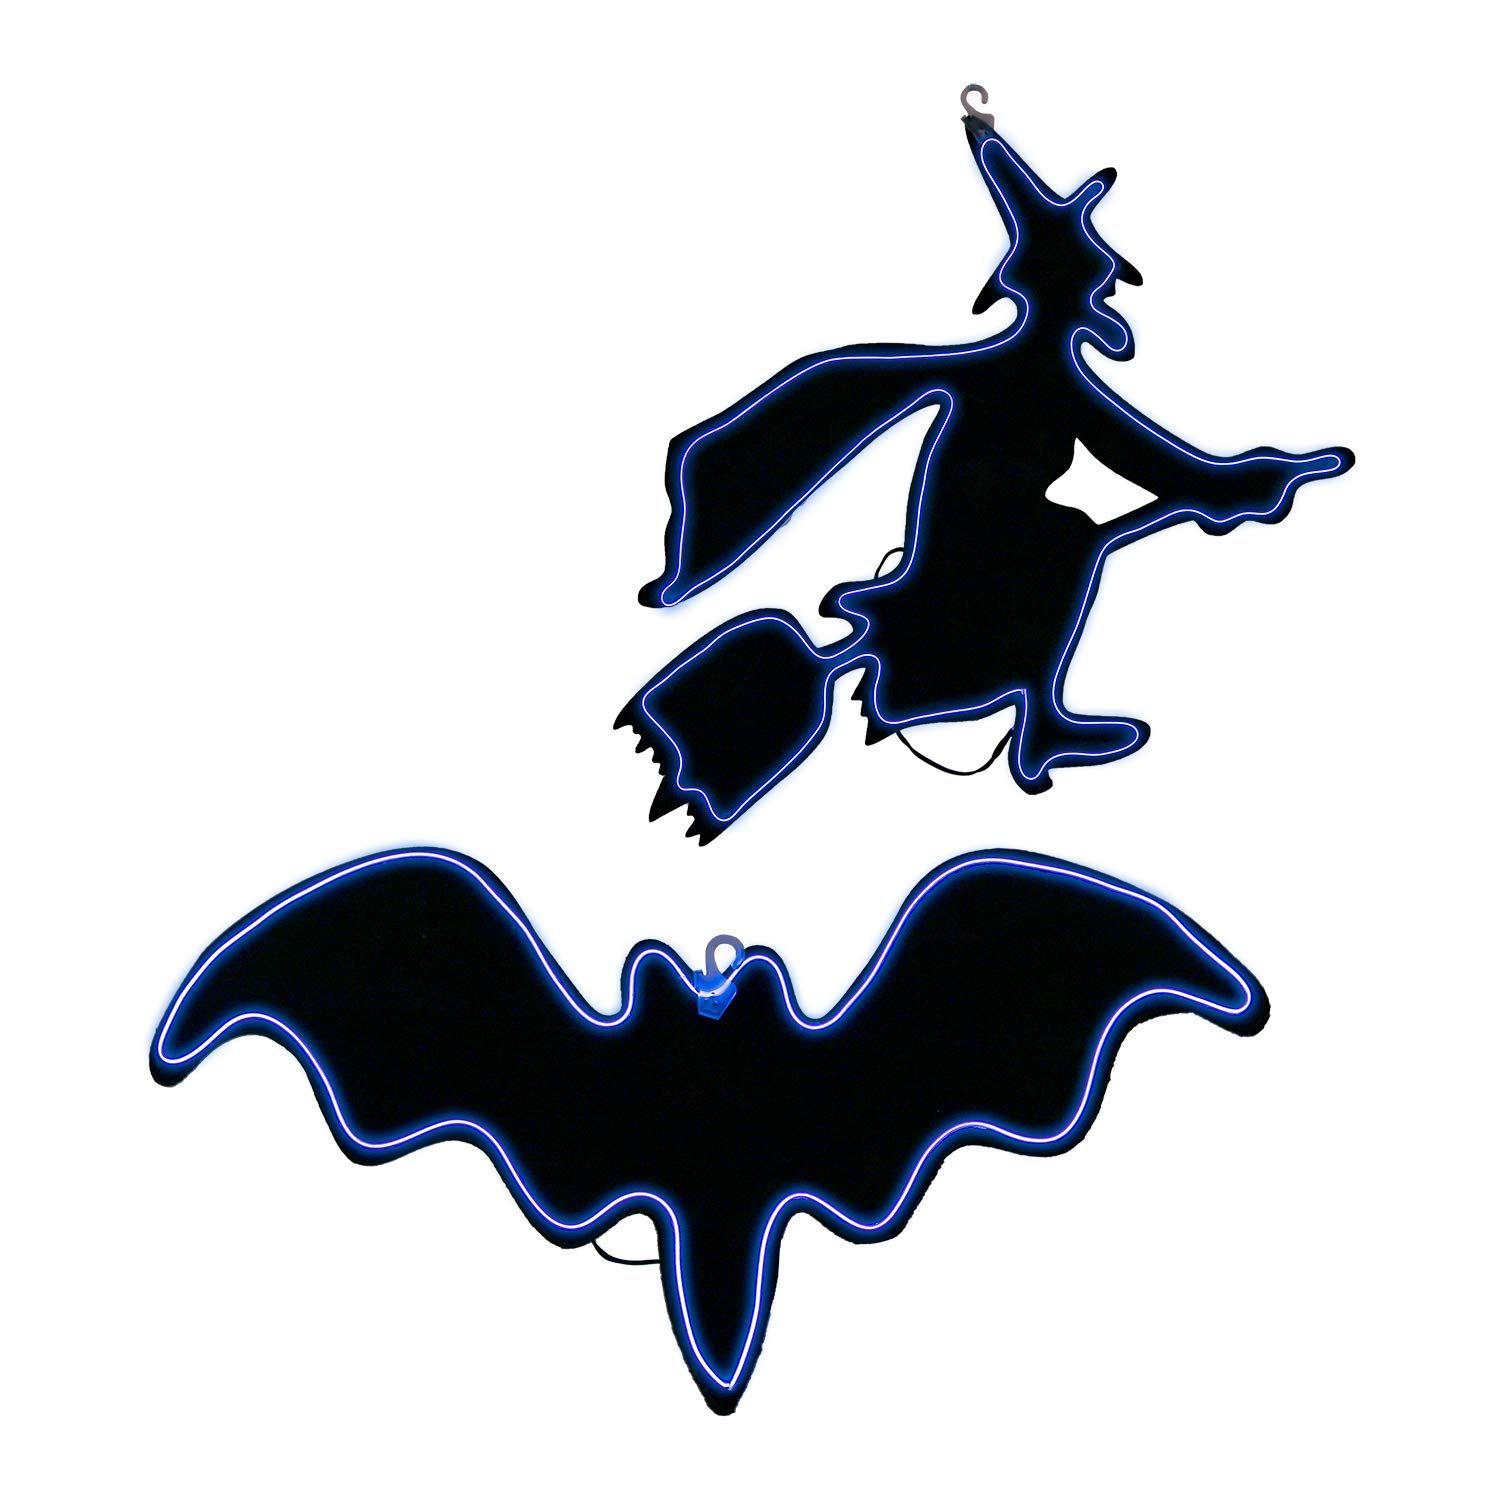 Bat Silhouette Images for Logo - Amazon.com: Halloween Haunters Purple Light-Up Sign Hanging Wicked ...